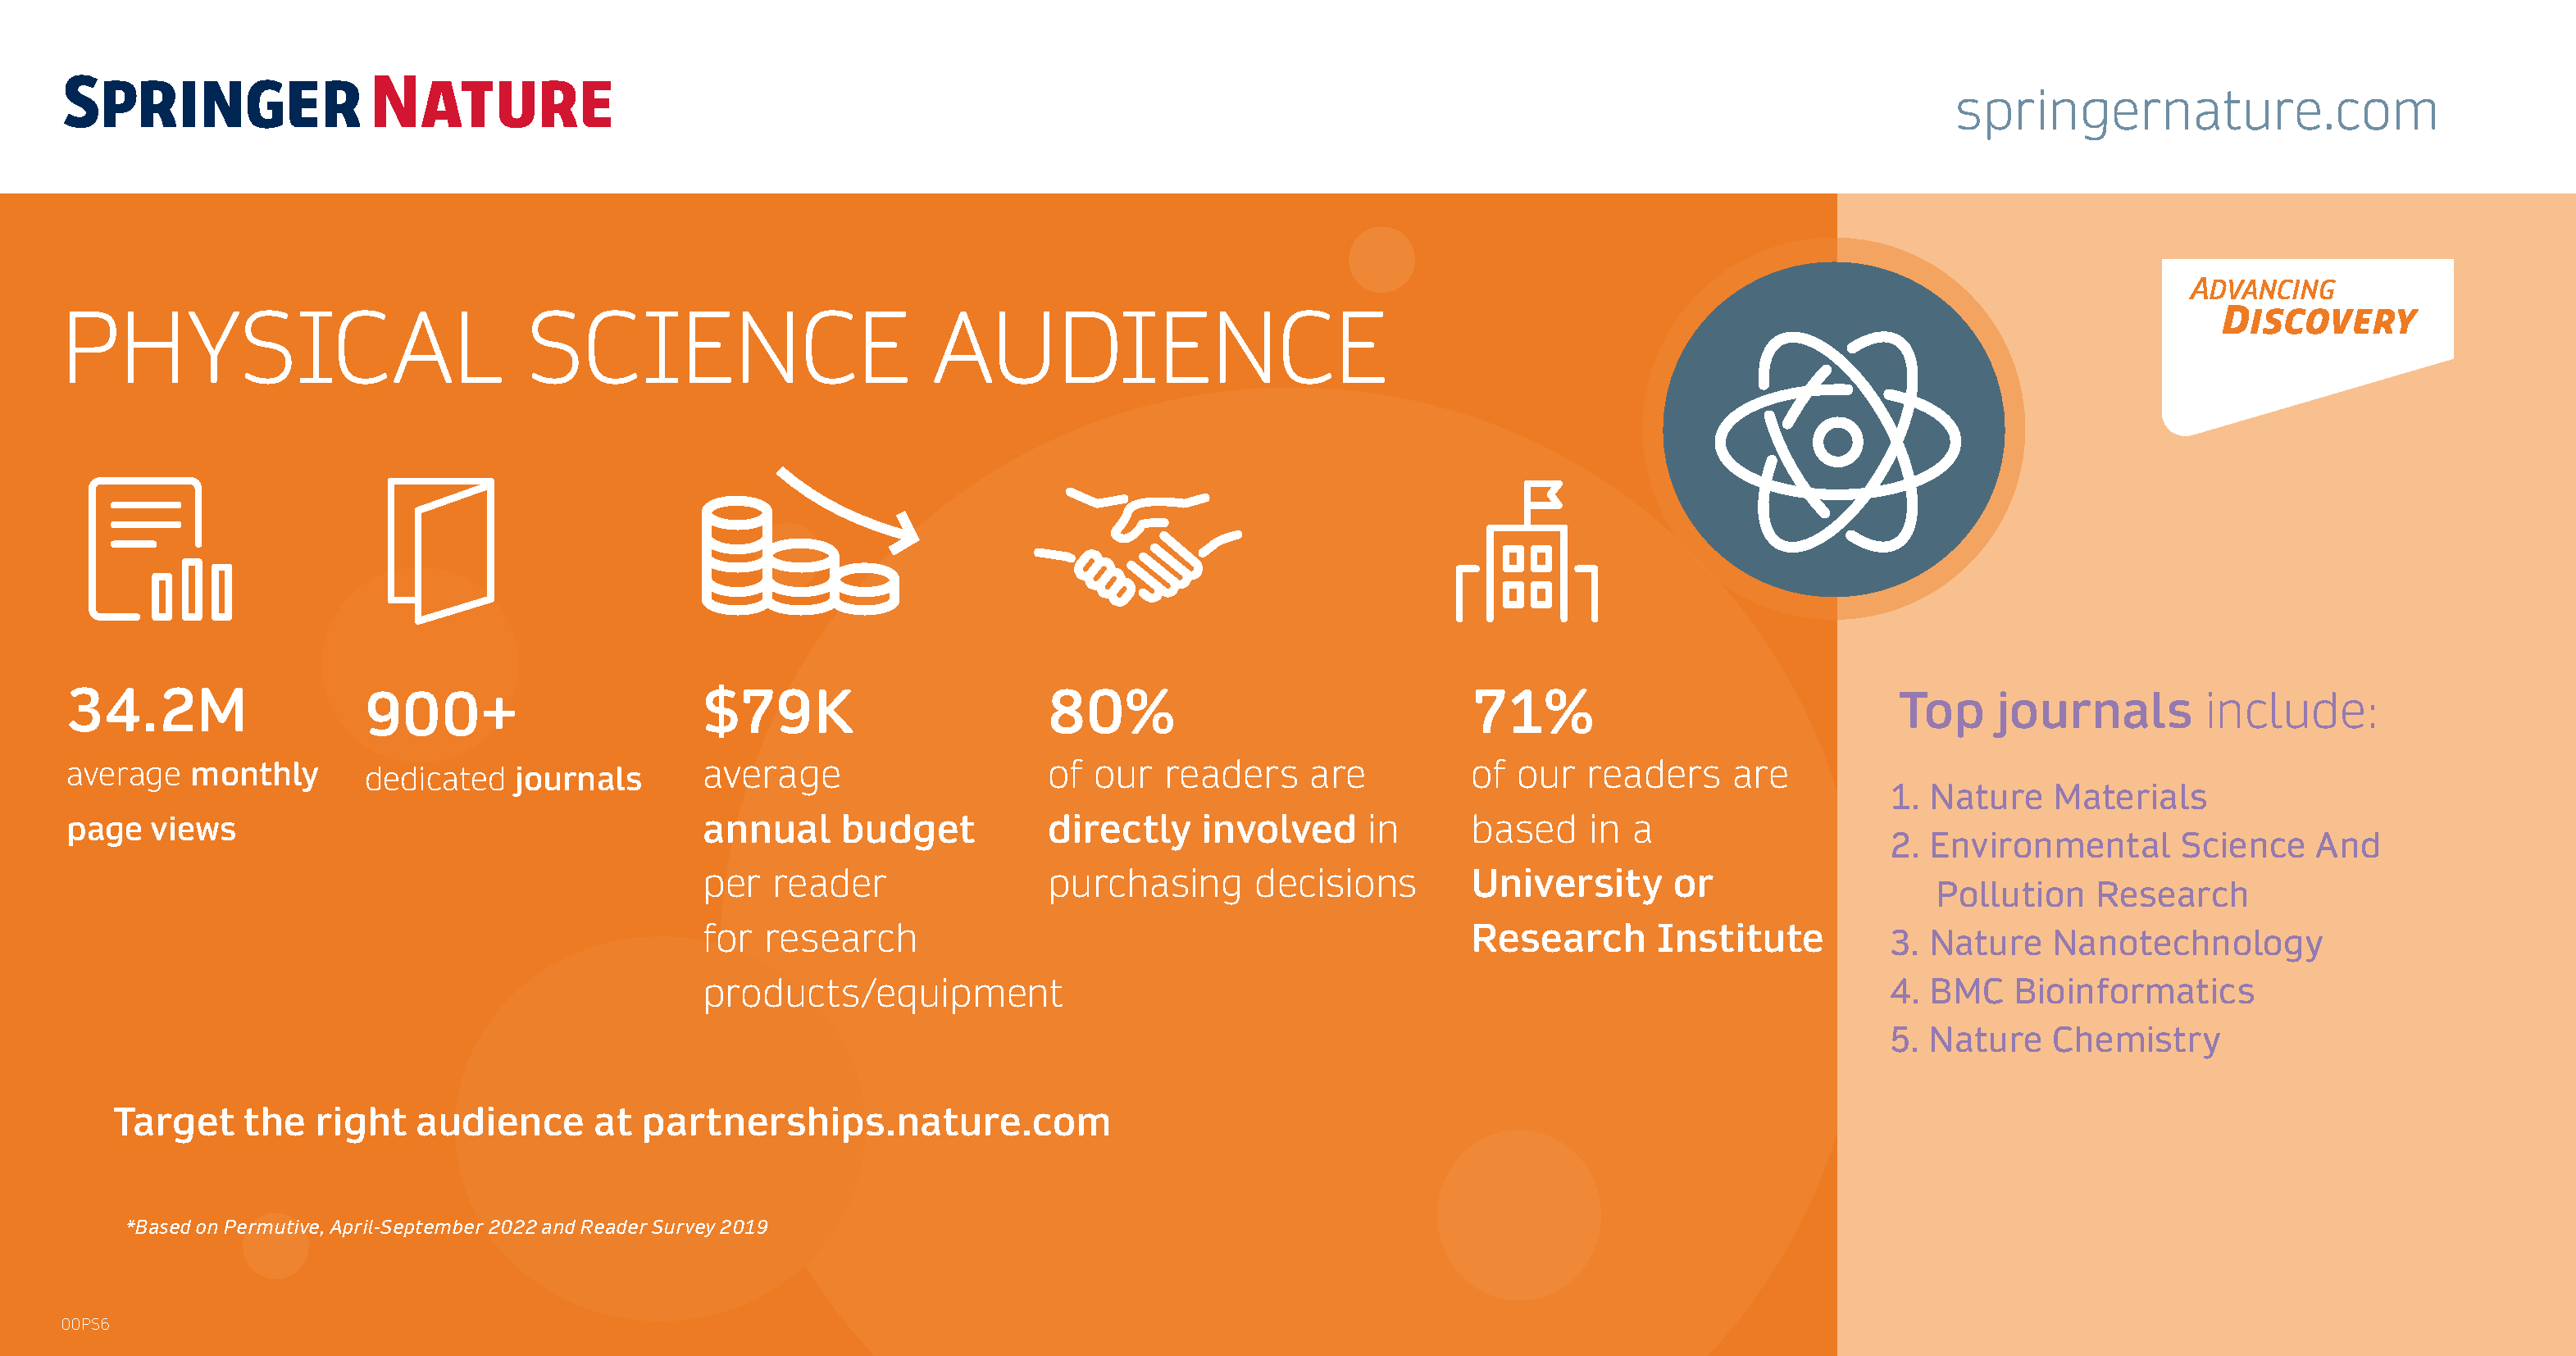 Springer Nature physical science audience